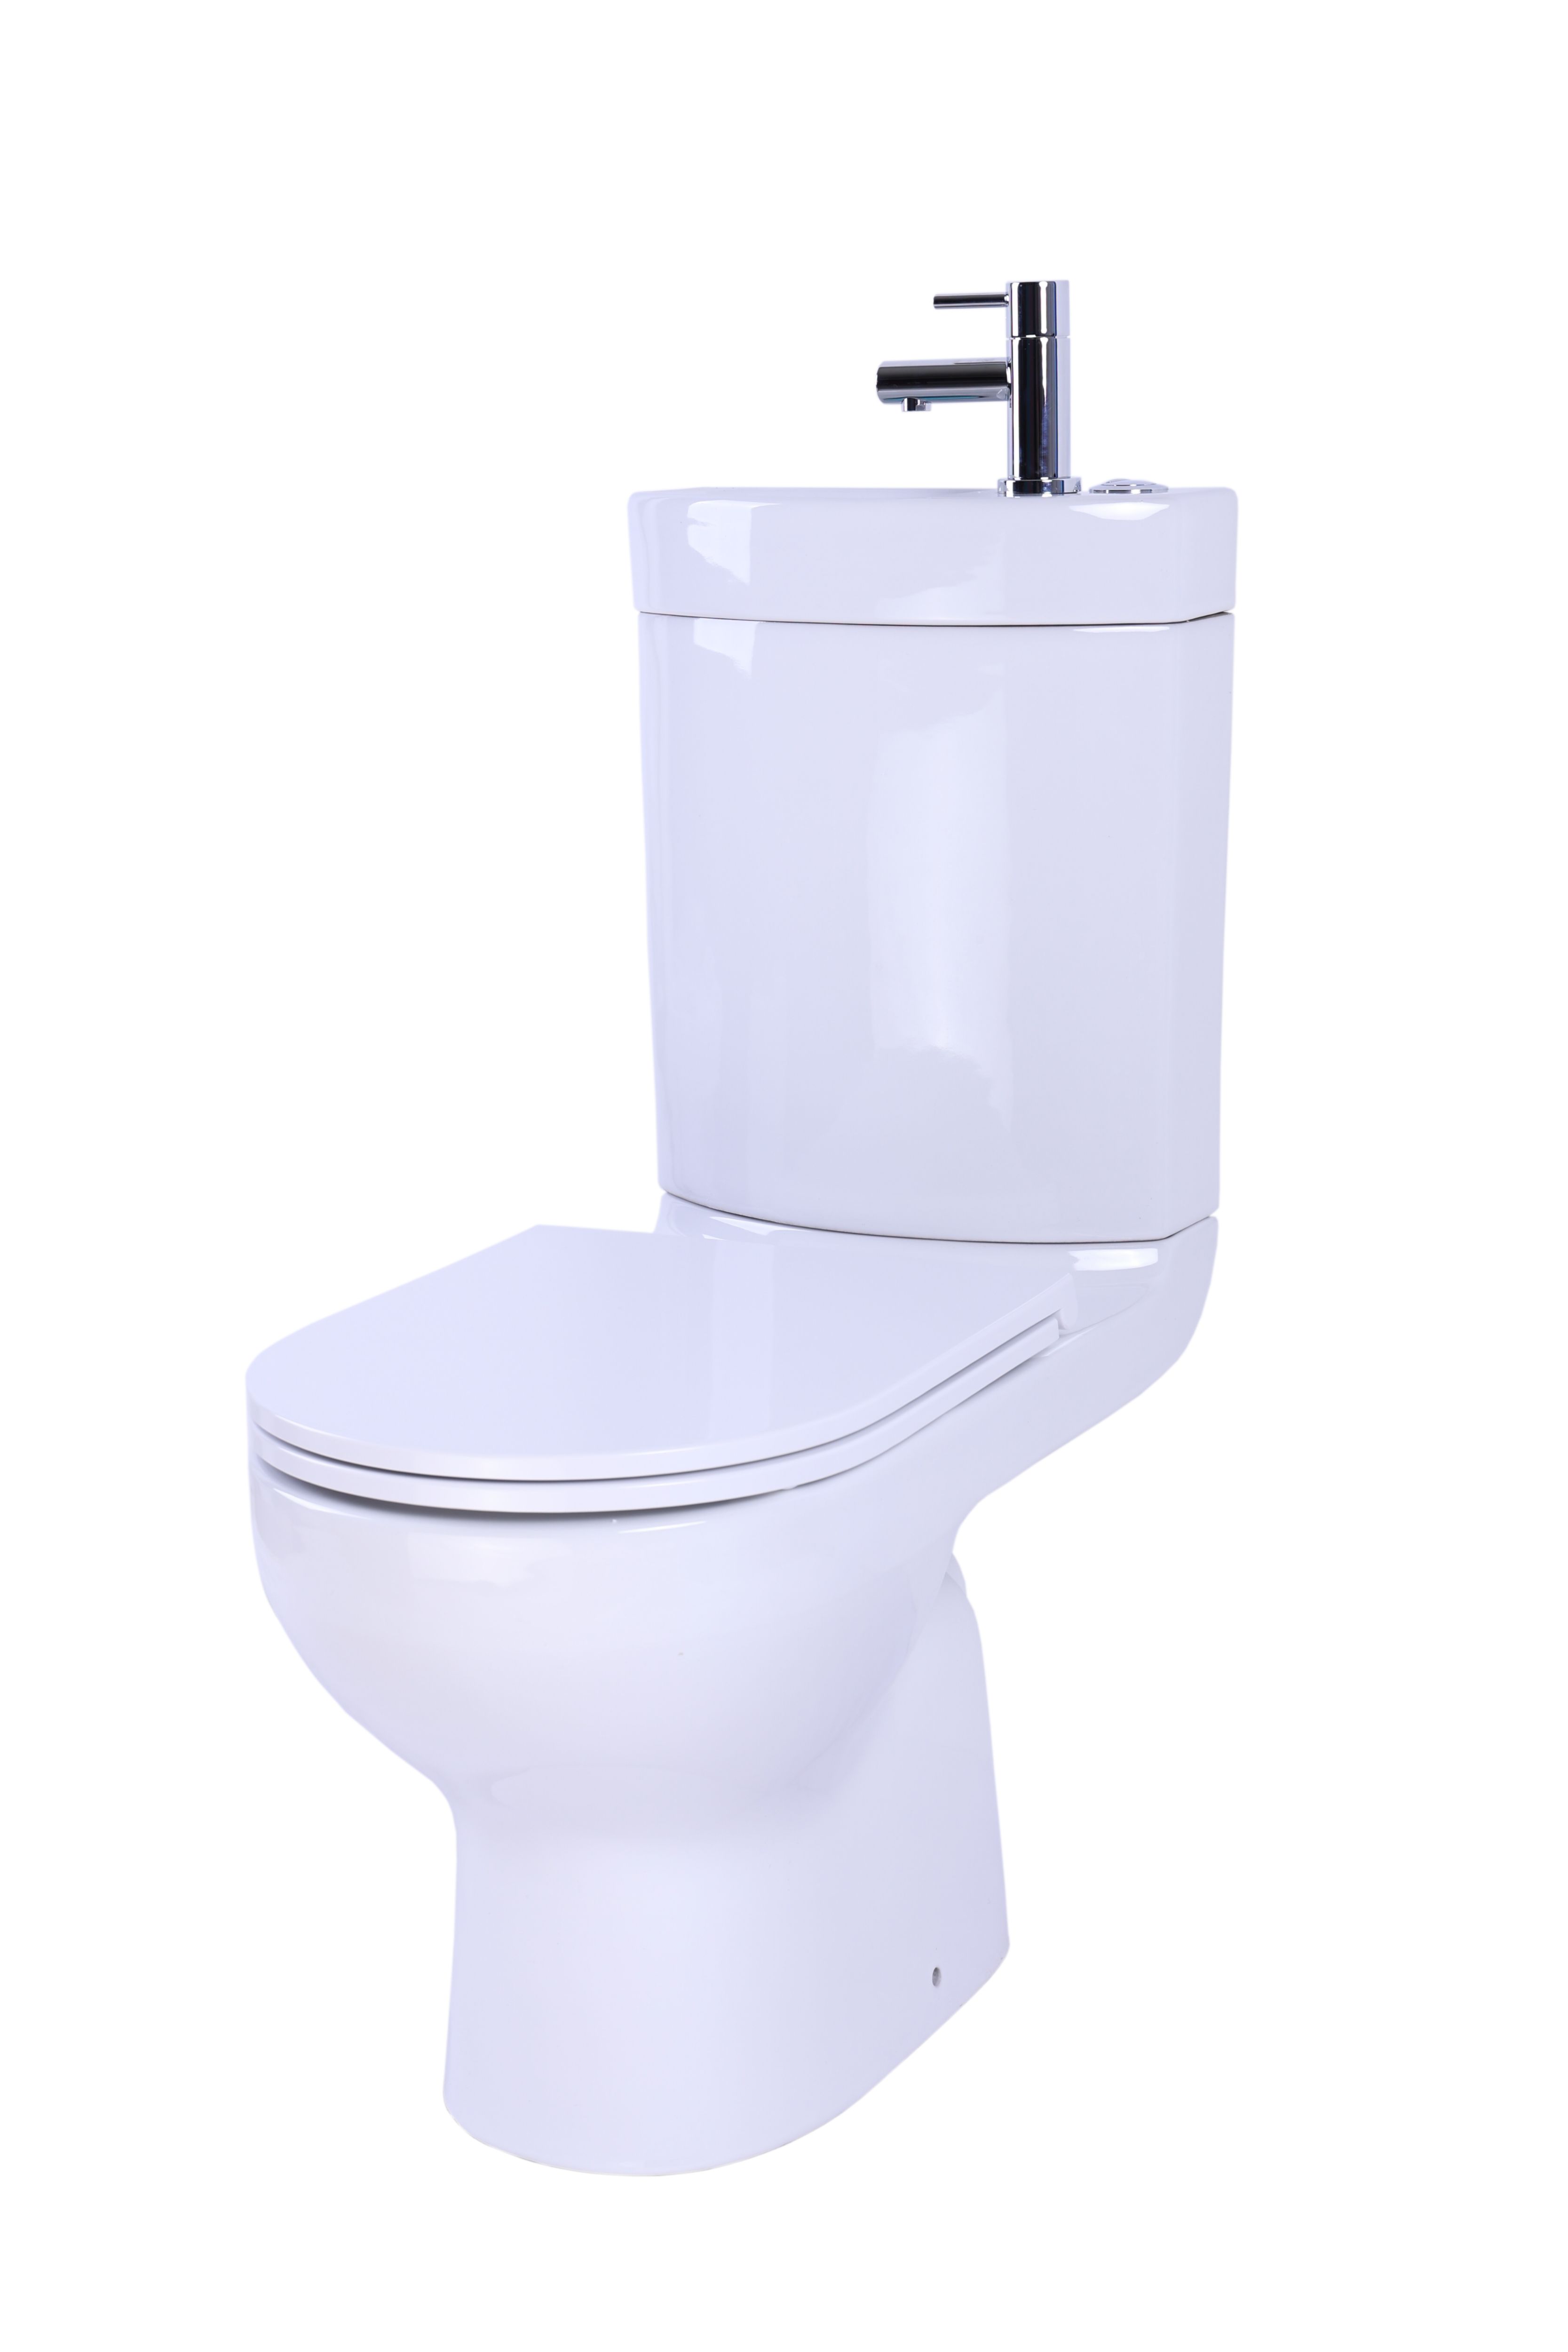 GoodHome Cavally White Close-coupled Toilet, basin & tap pack (W)885mm (H)381mm